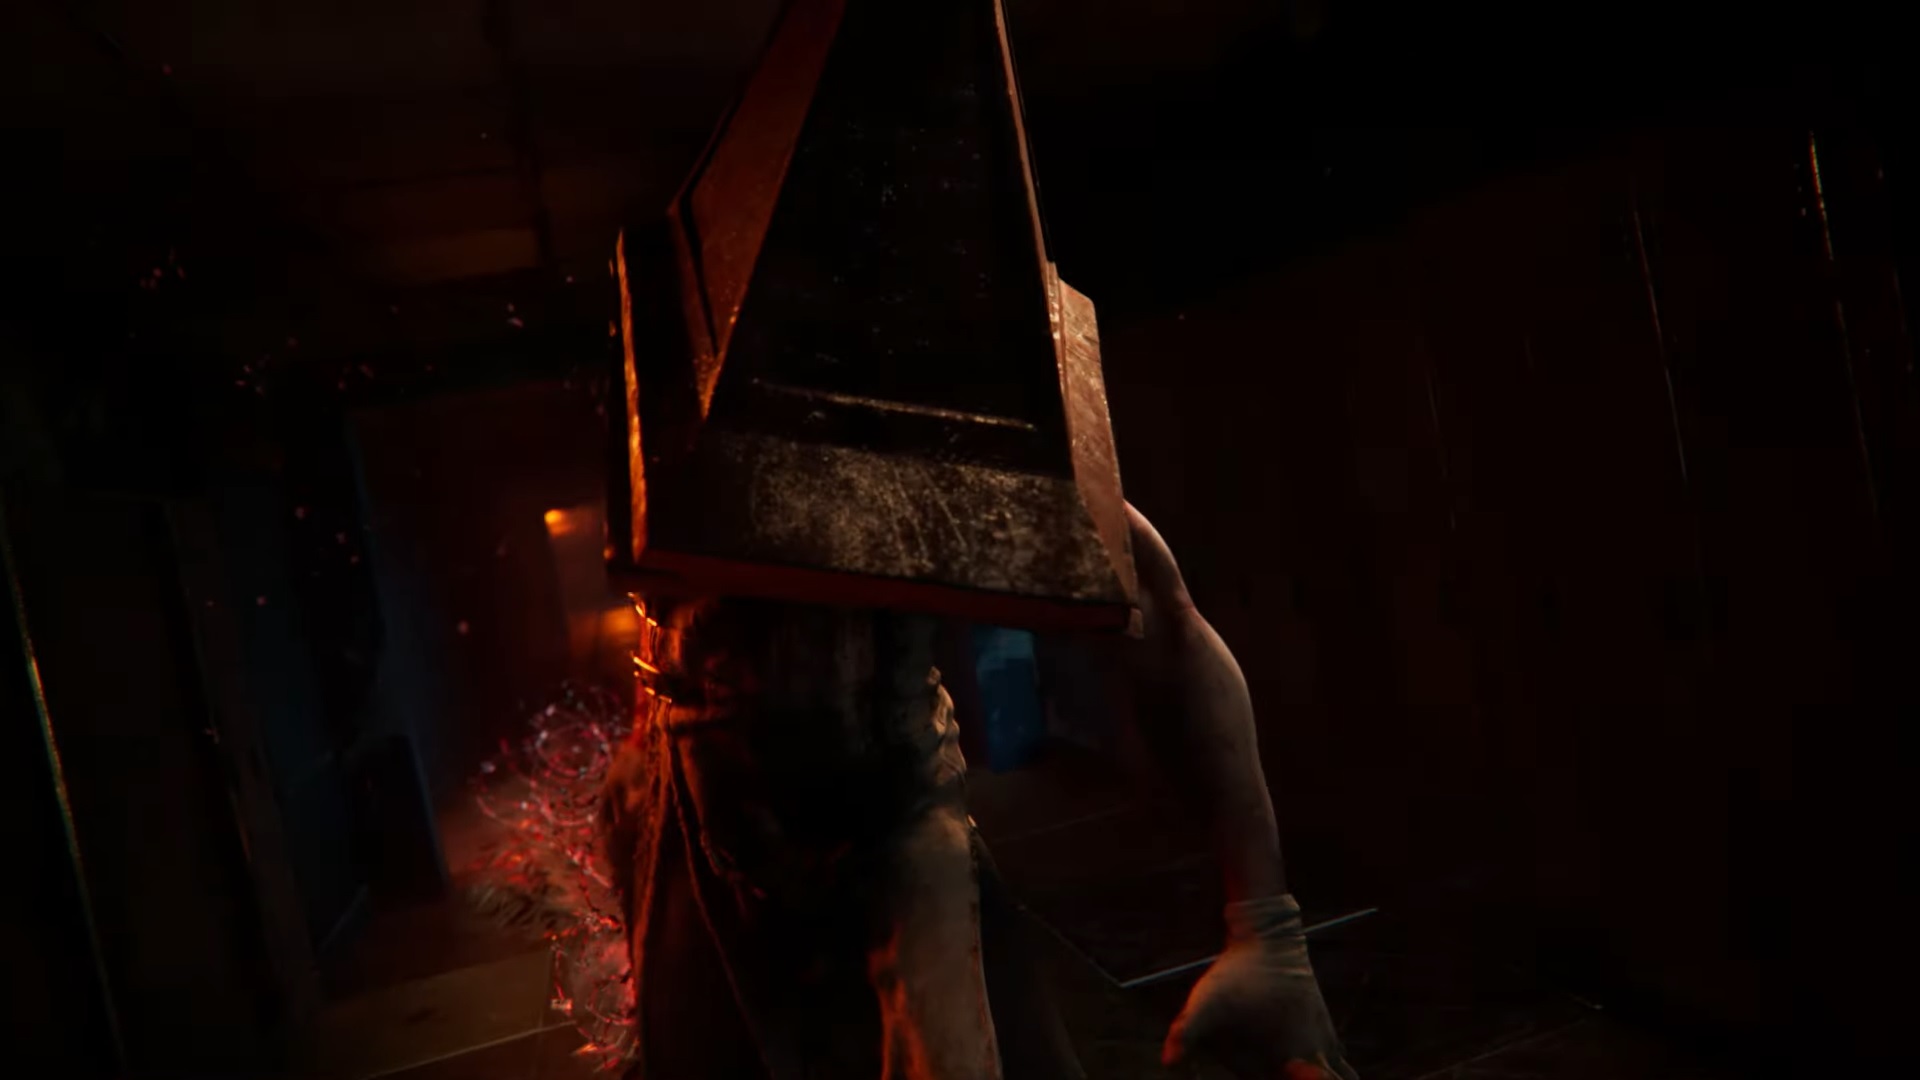 Dead by Daylight x Silent Hill - Pyramid Head Gameplay 